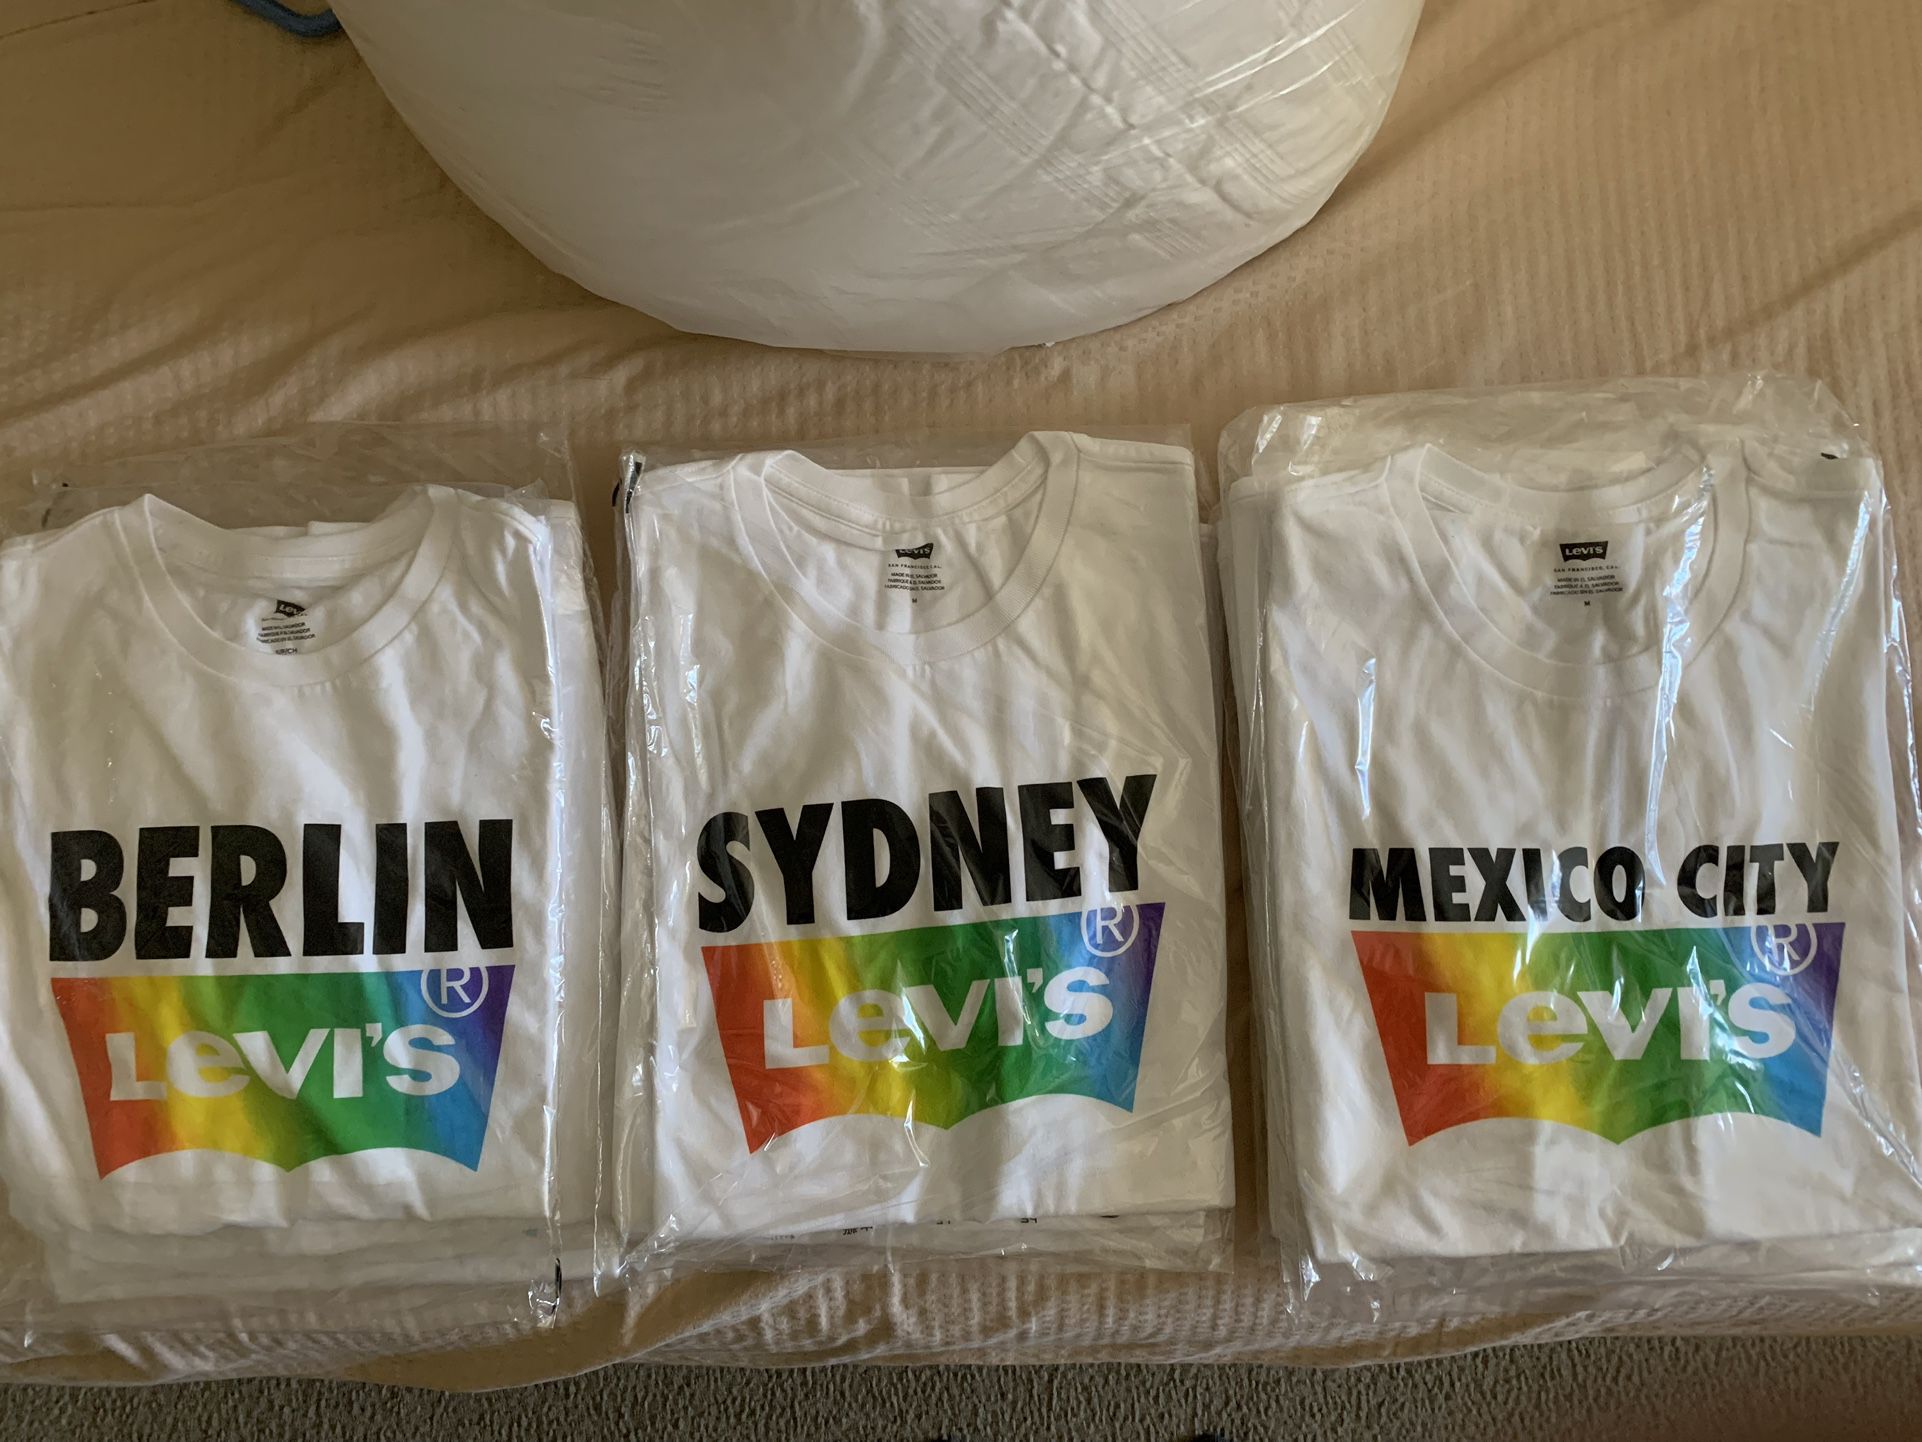 Levi’s - Pride - T-Shirts - (New)  - $ 5 - Each